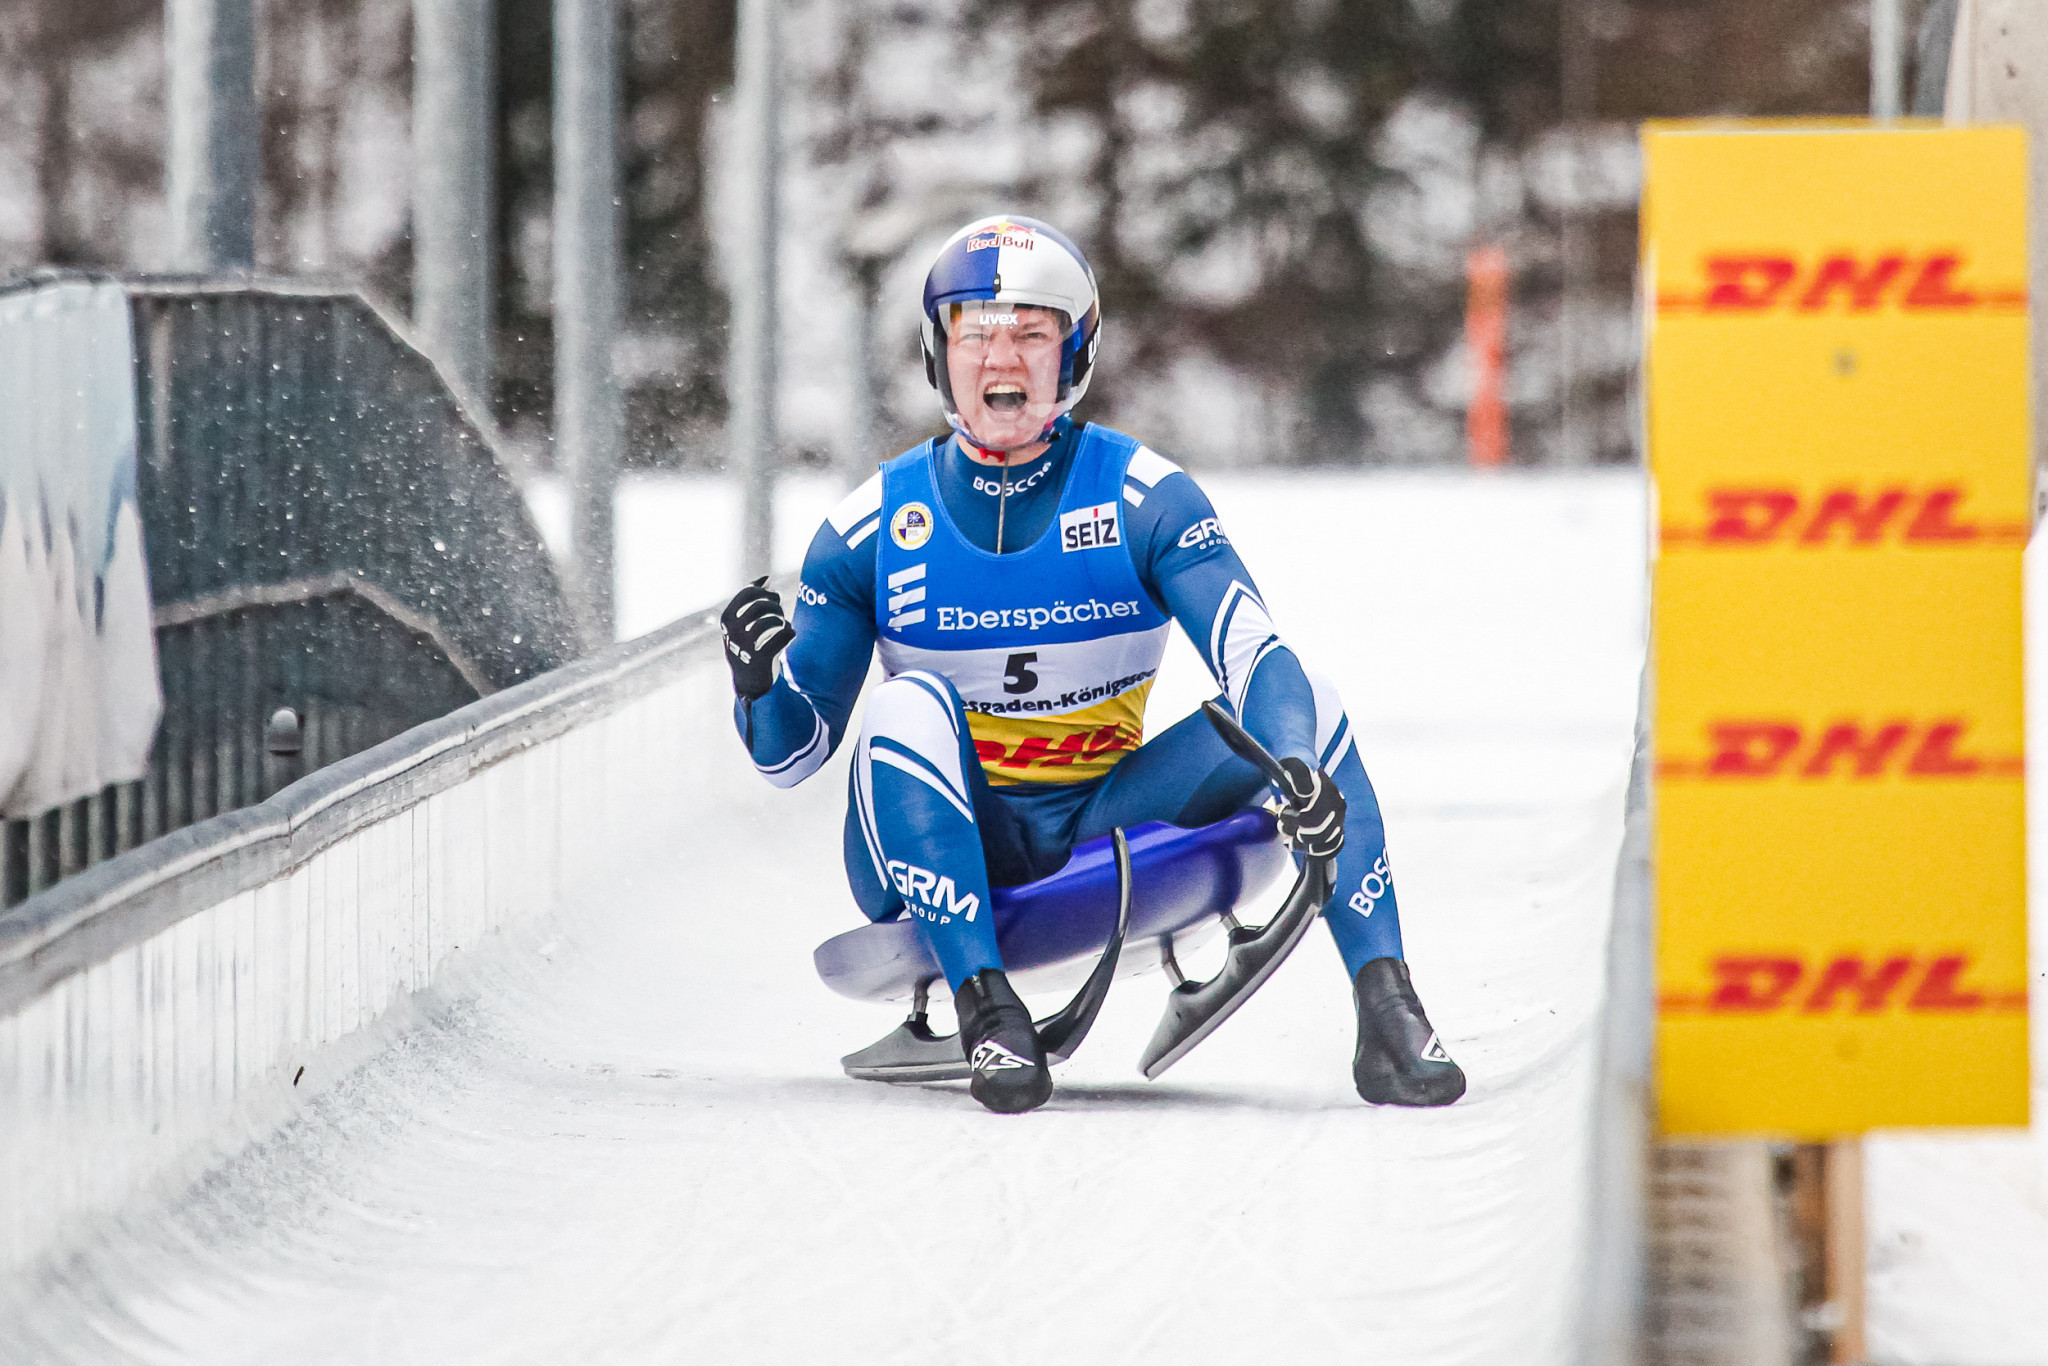 Roman Repilov will be a big hope in the luge ©Getty Images